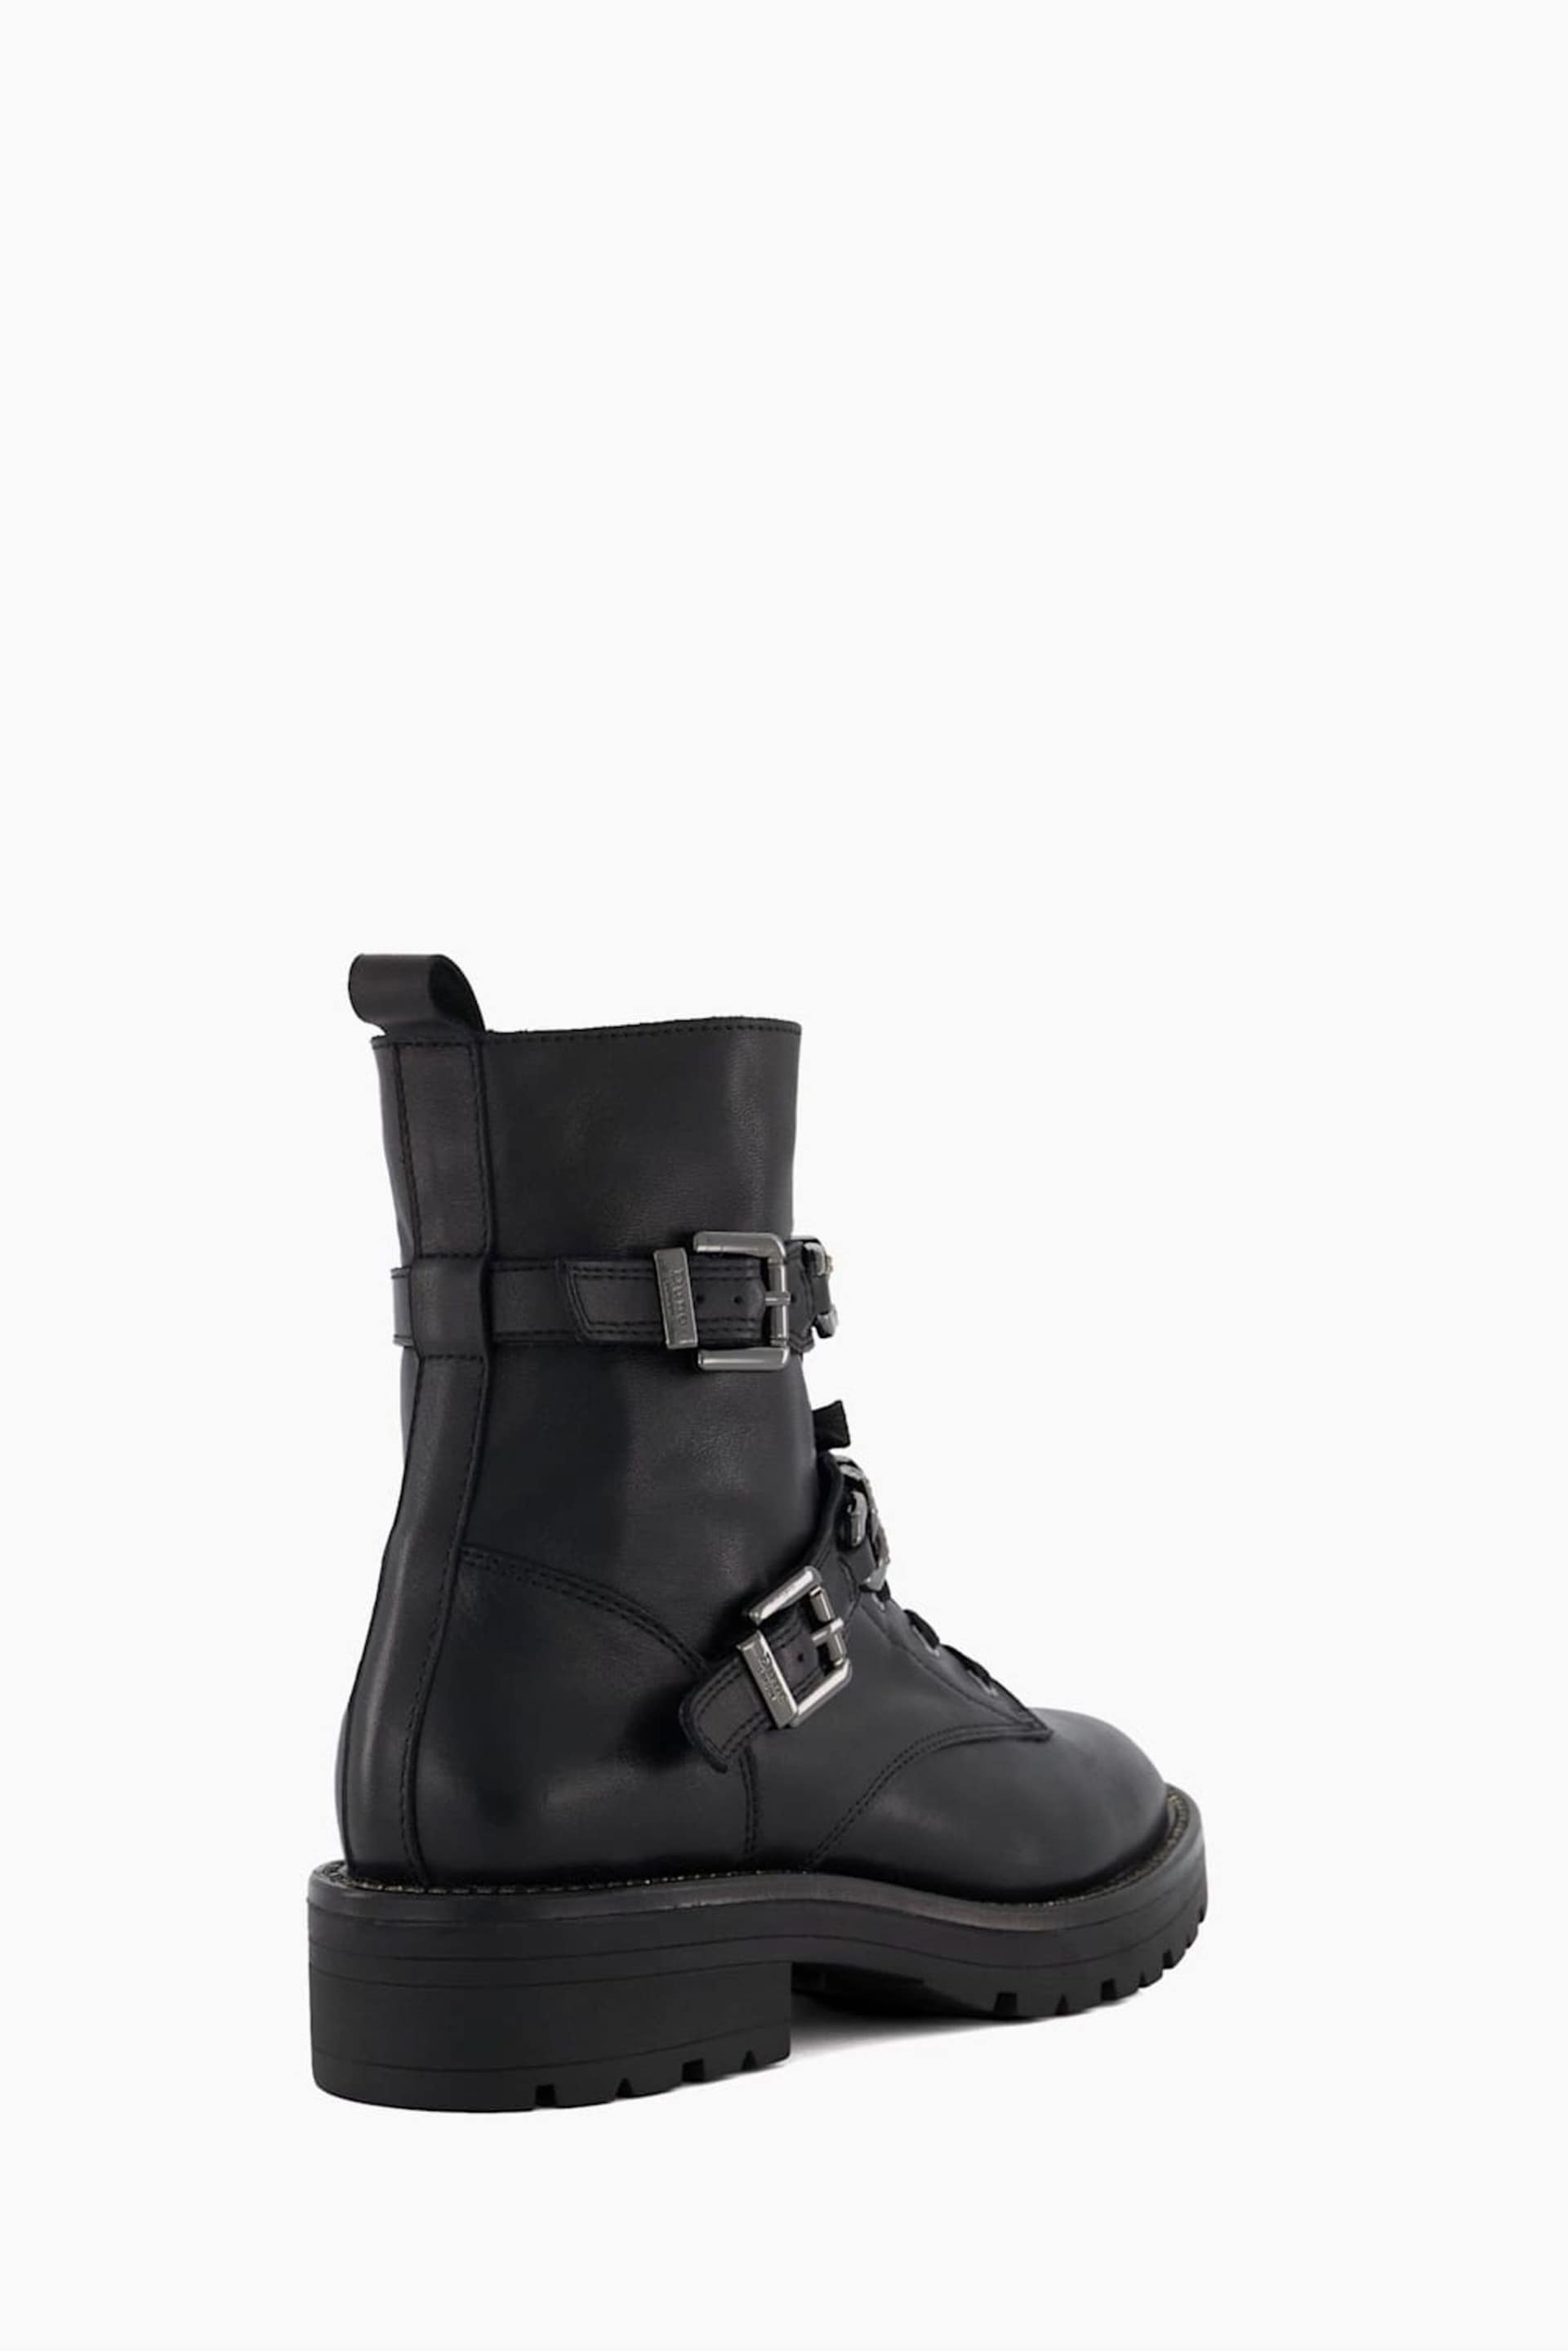 Dune London Black Plazas DD Chain Chunky Boots - Image 3 of 5